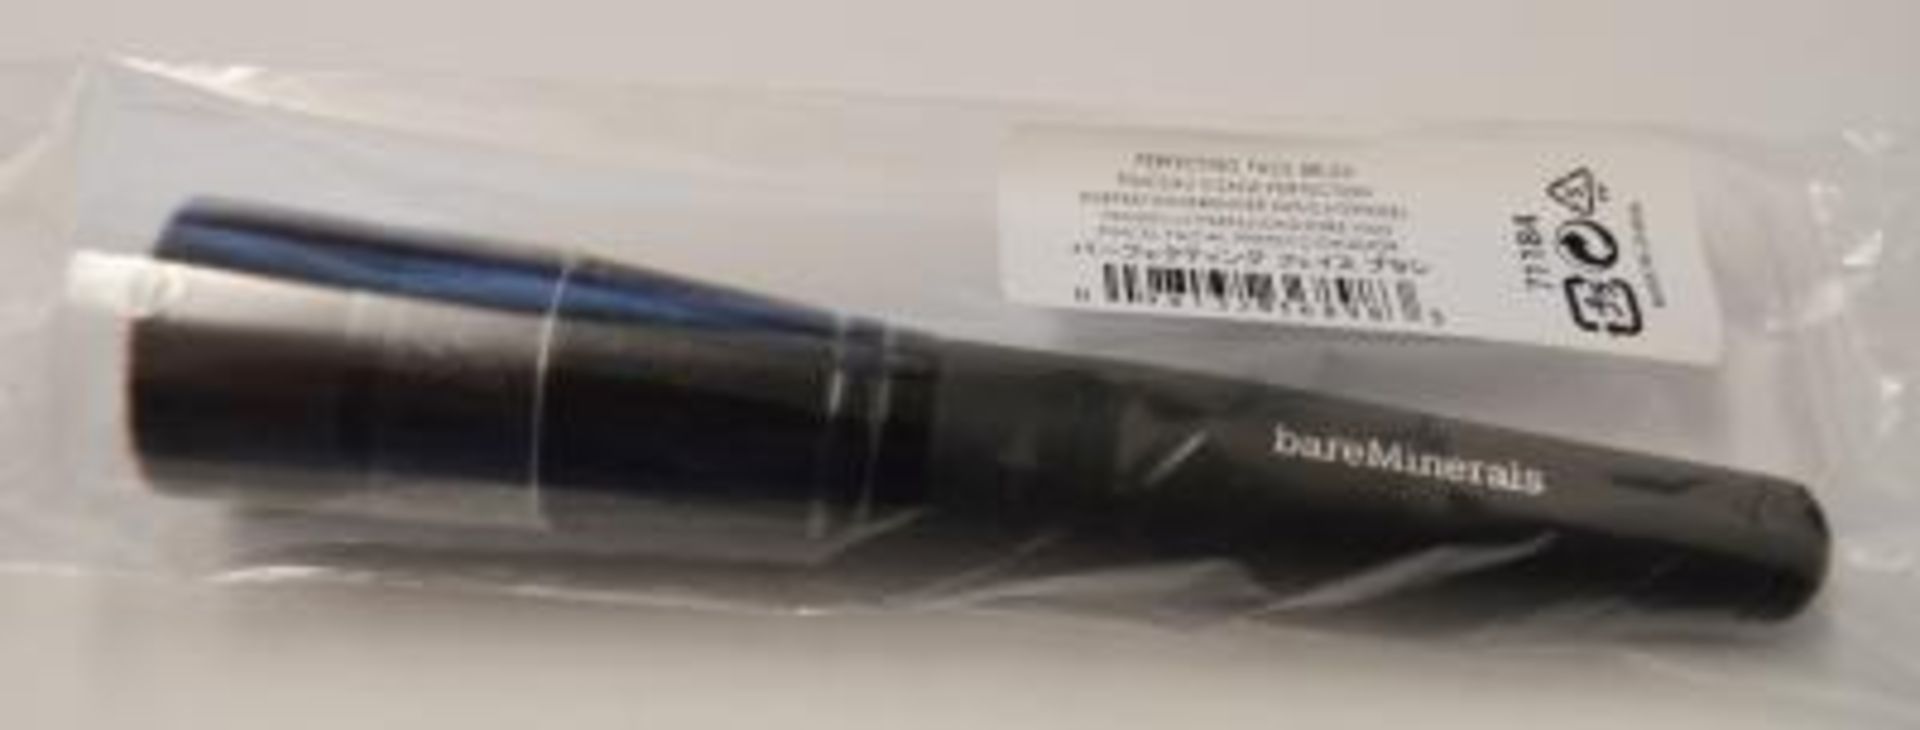 1 x Bare Escentuals bareMinerals “BARESKIN” Perfecting Face Brush - Genuine Product - Brand New - Image 5 of 14